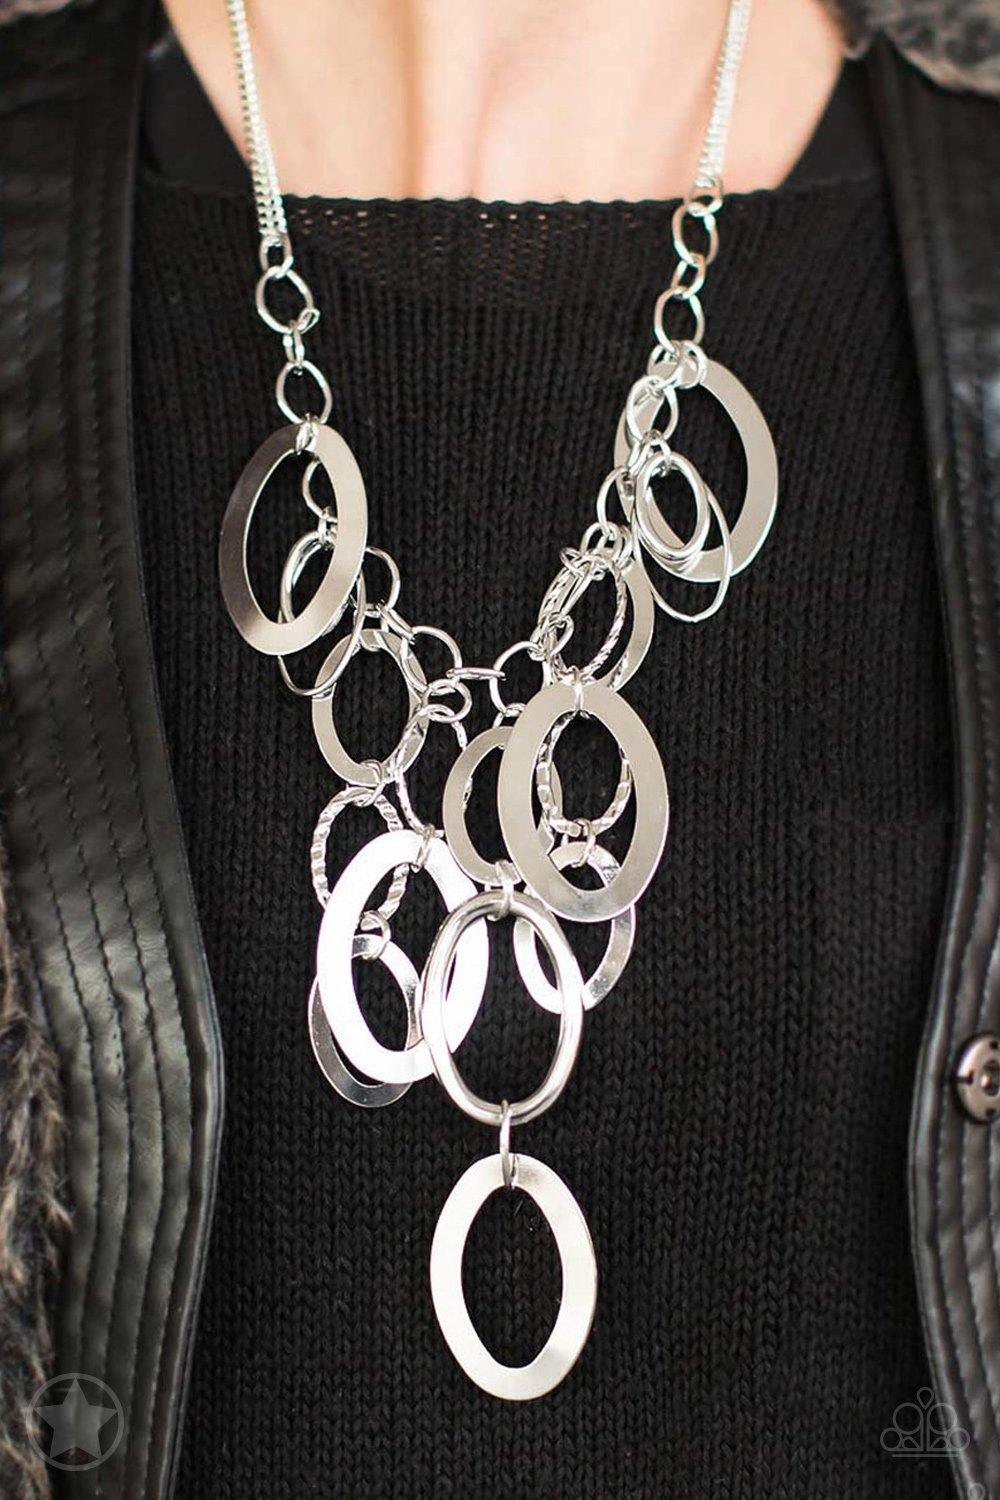 A Silver Spell Necklace - Daria's Blings N Things